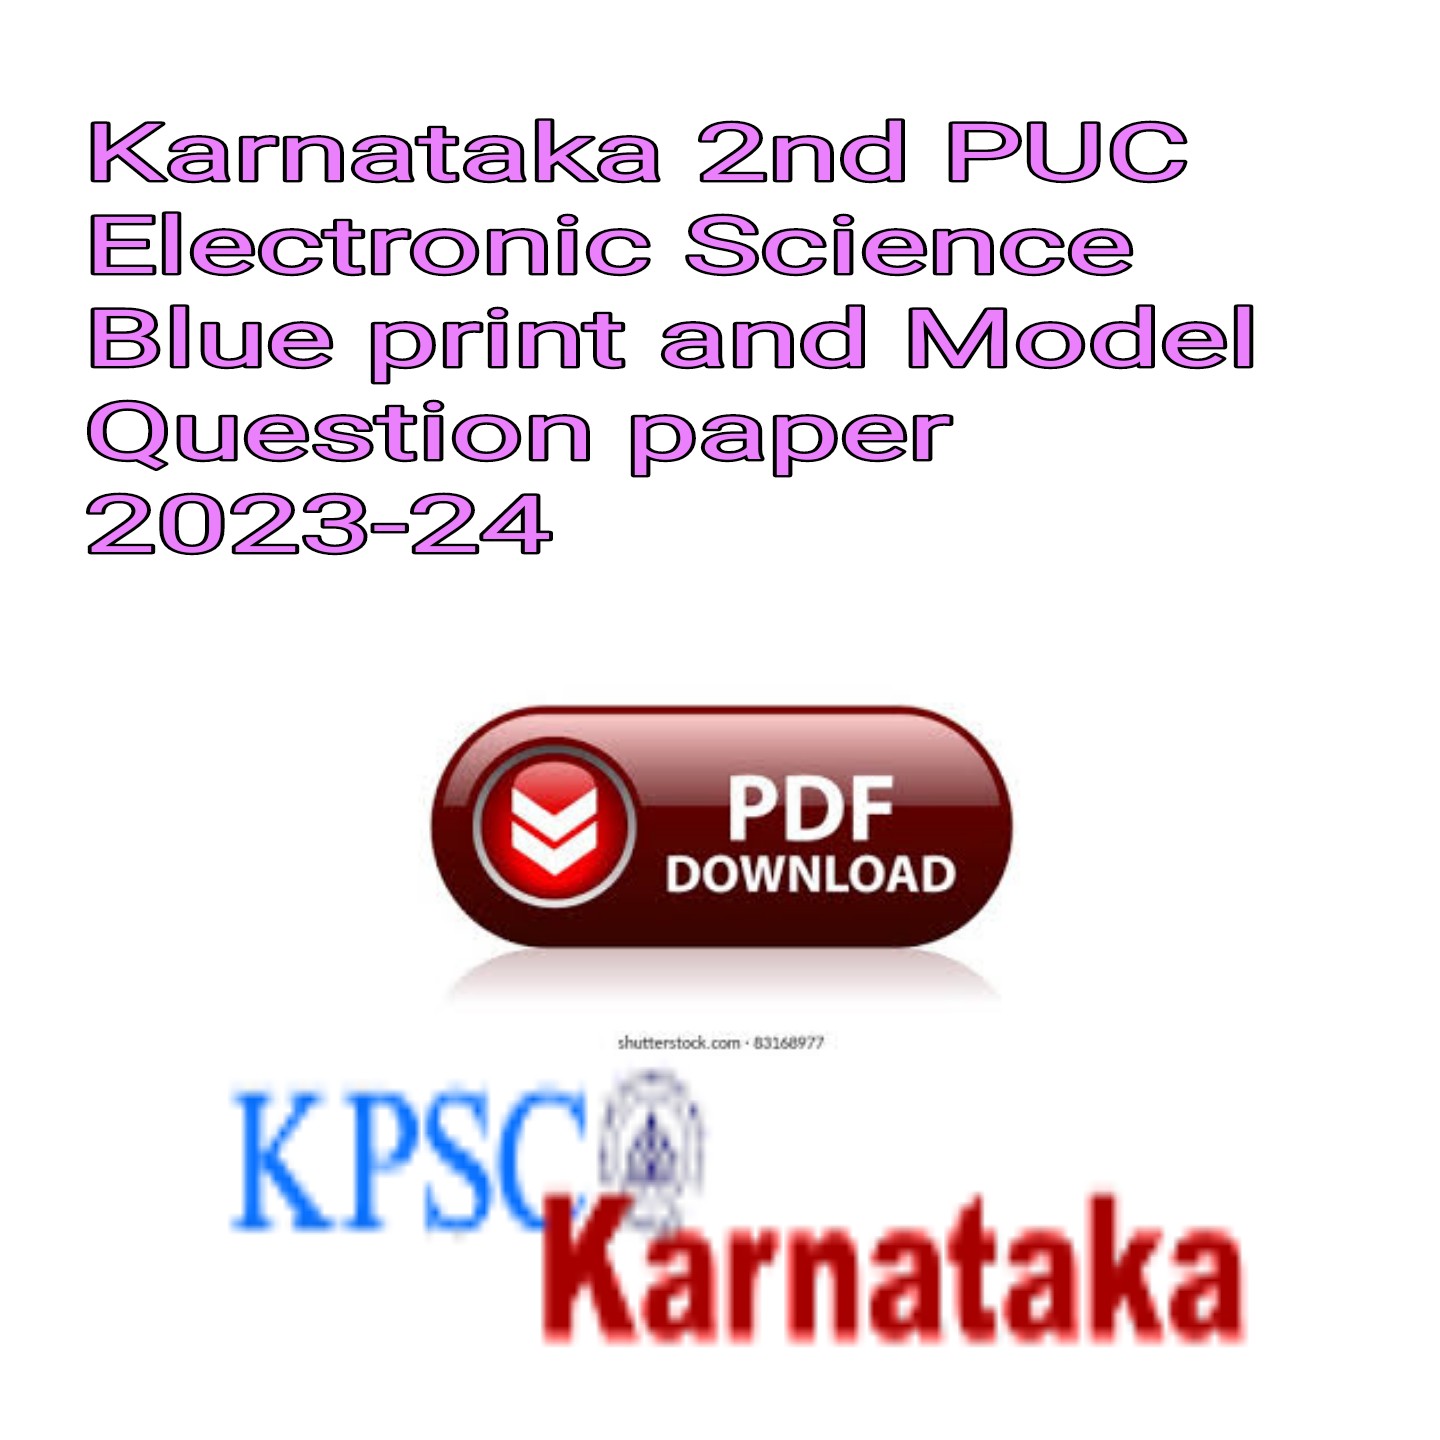 Karnataka 2nd PUC Electronic Science Blue print and Model Question paper 2023-24